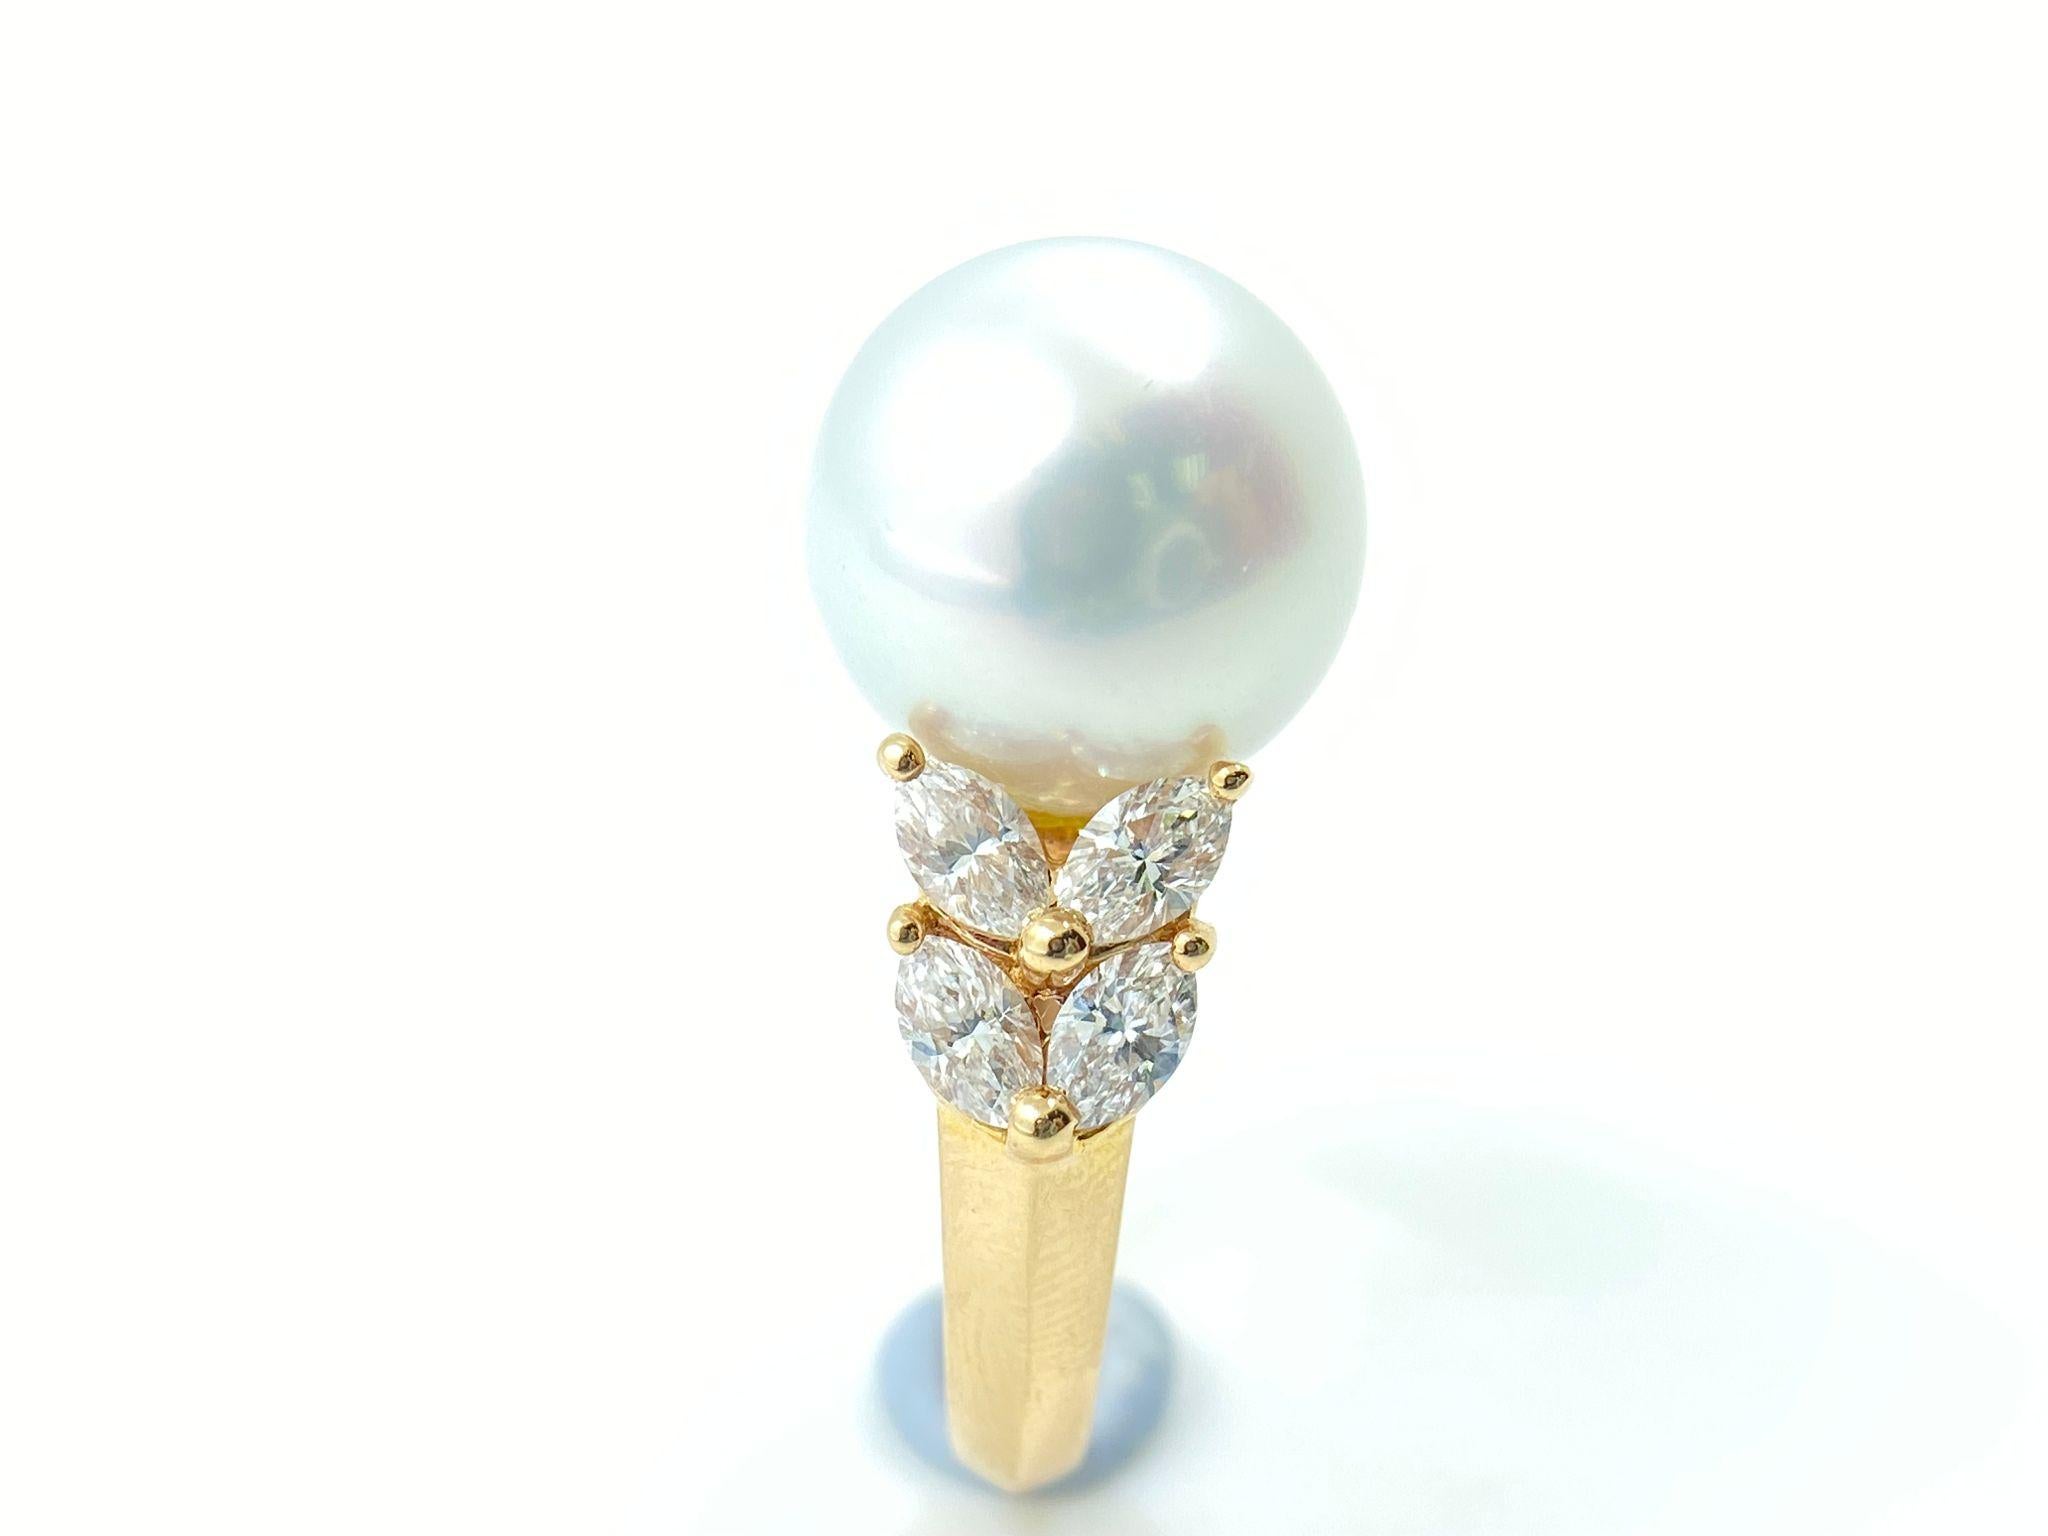 Elevate your elegance with this mesmerizing ring, thoughtfully designed to spotlight a pristine 13mm South Sea white pearl. Its natural luster becomes even more enchanting, thanks to the constellation of 8 marquise diamonds that surround it. These